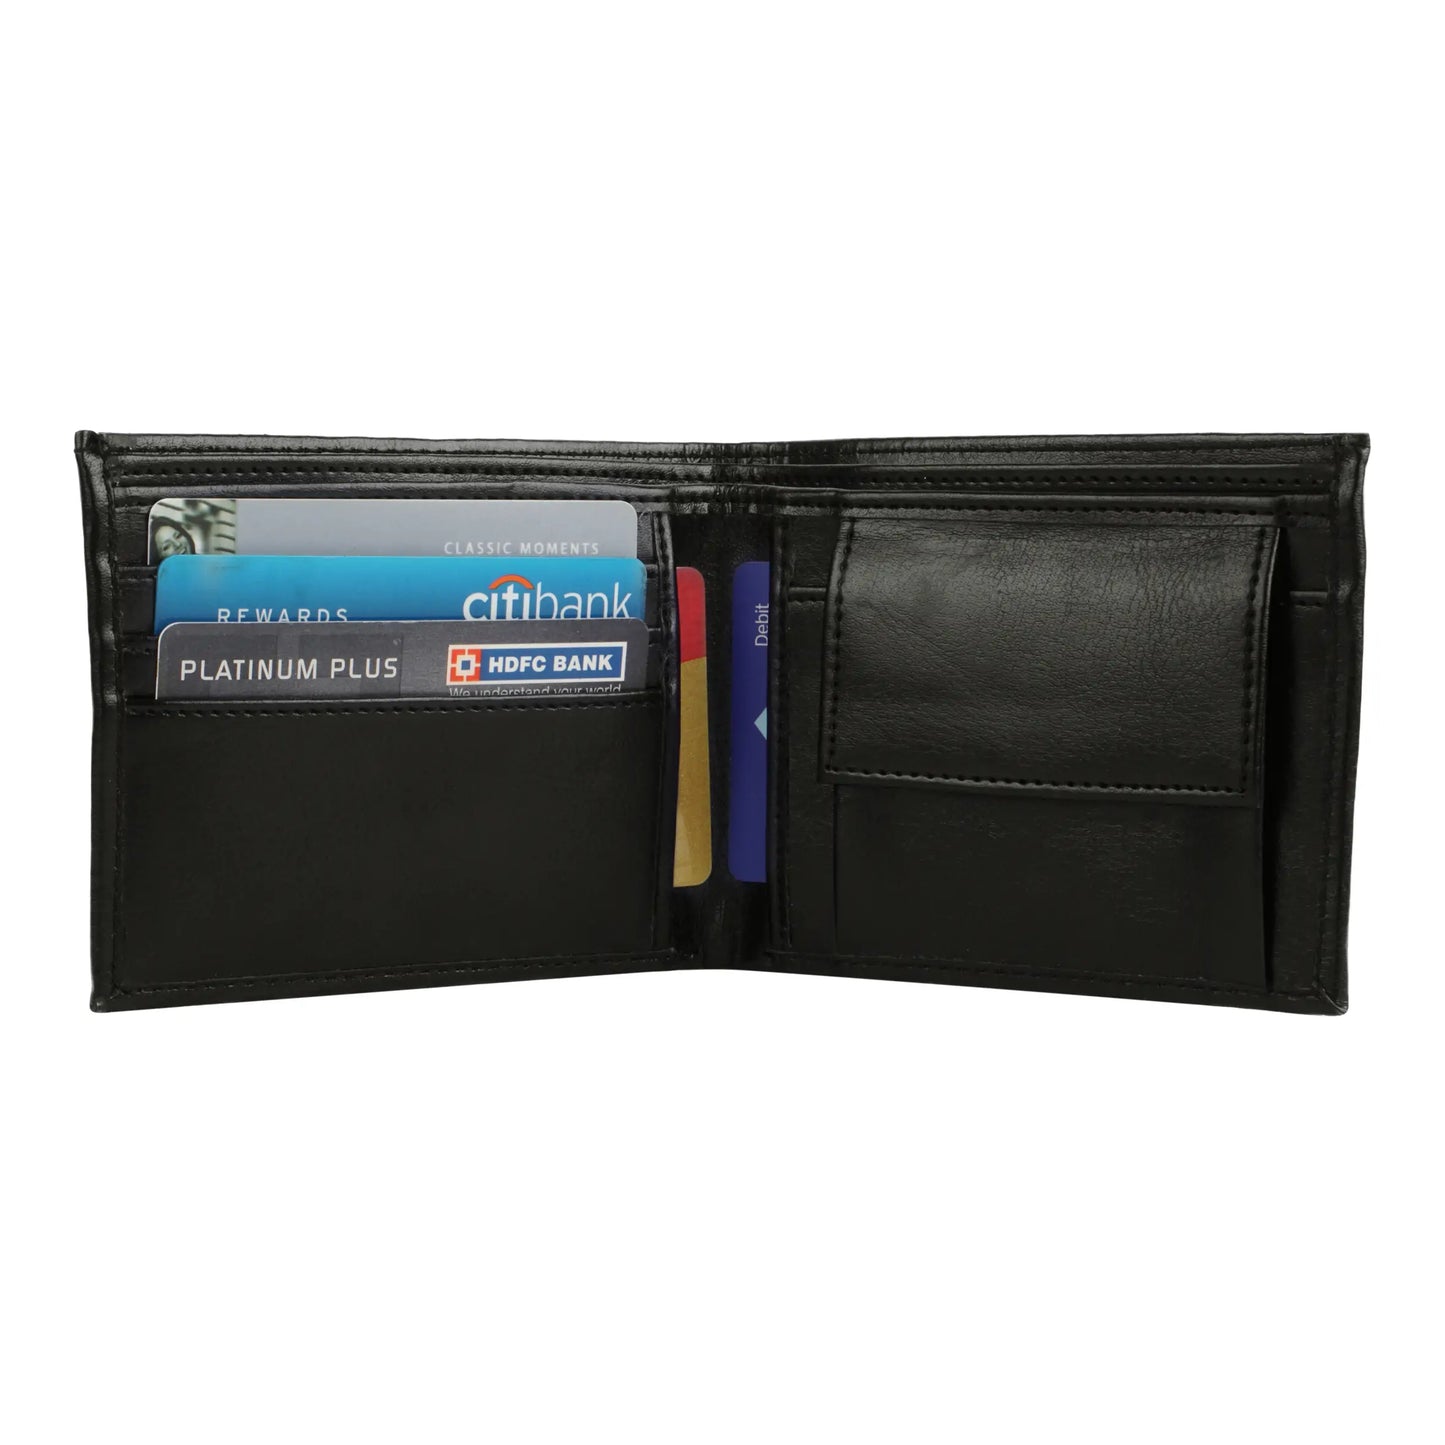 Pen, Keychain and Wallet 3in1 Combo Gift Set - For Employee Joining Kit, Corporate, Client or Dealer Gifting, Promotional Freebie JK29